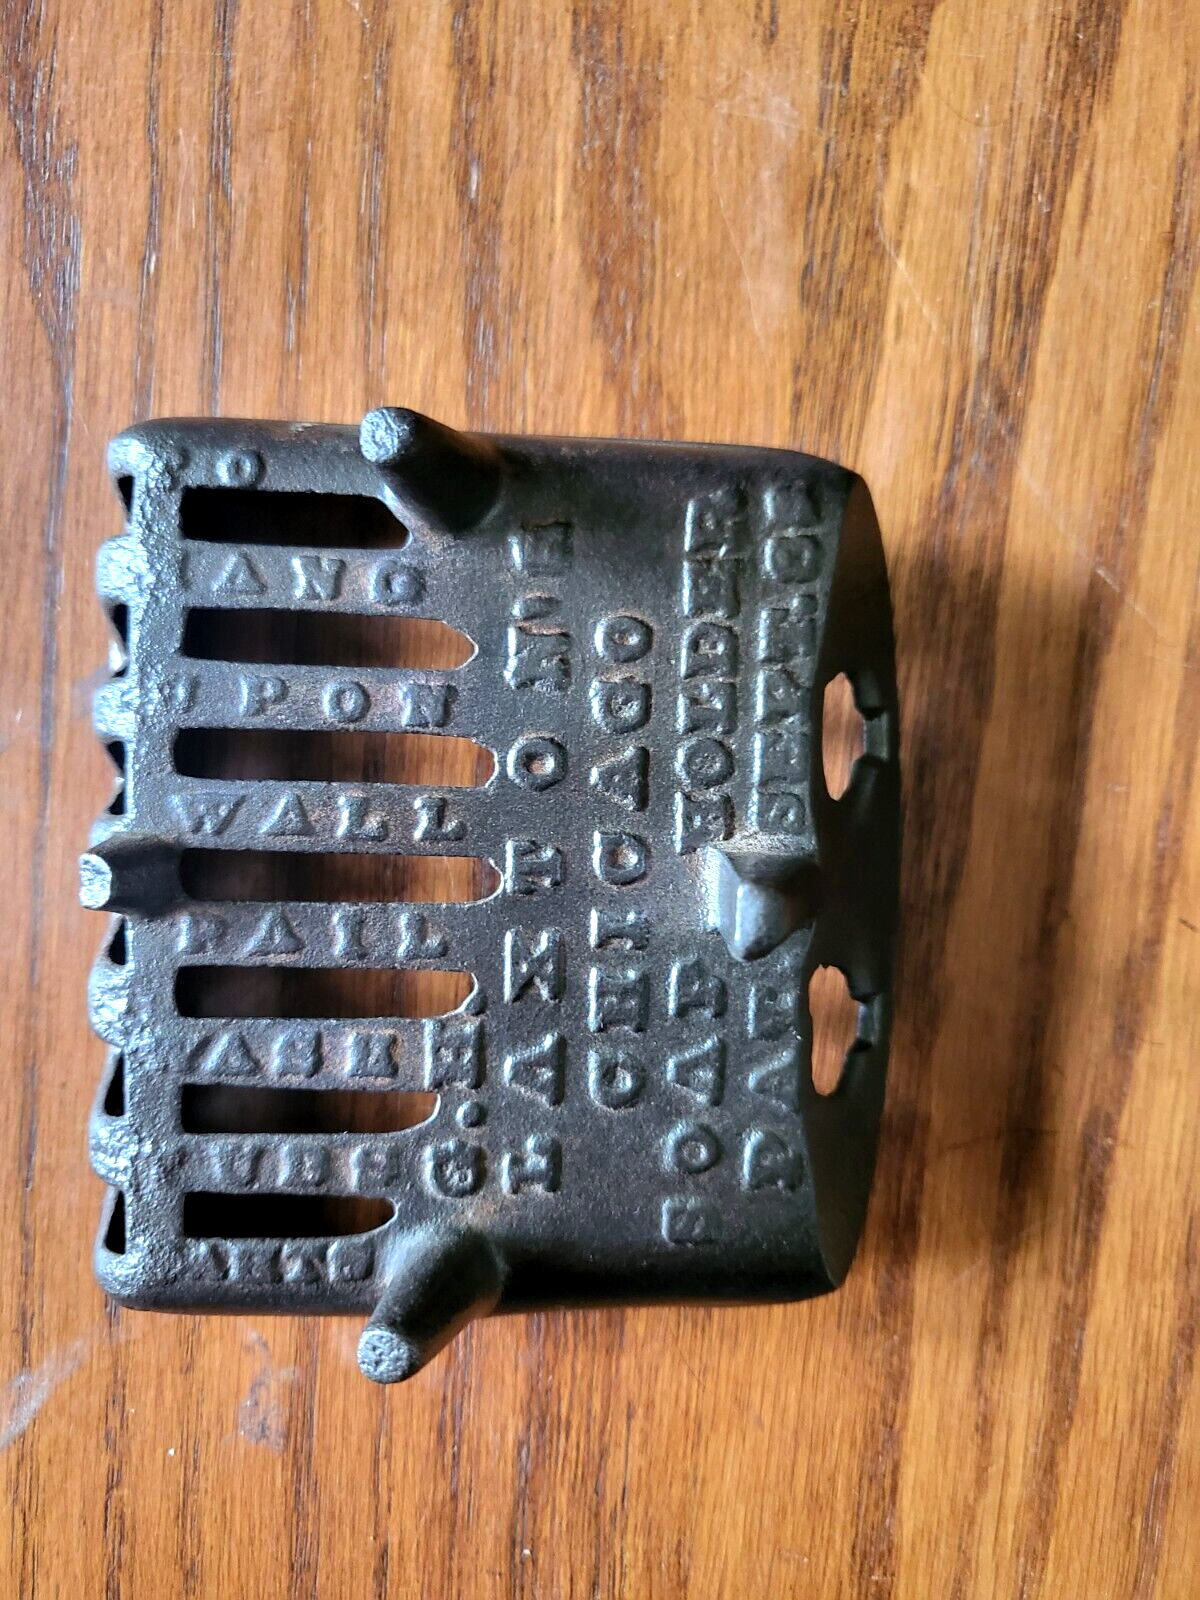 ATQ 1886 G.H. Laxton Embossed Cast Iron Soap Holder. Excellent Cond. -RARE FIND